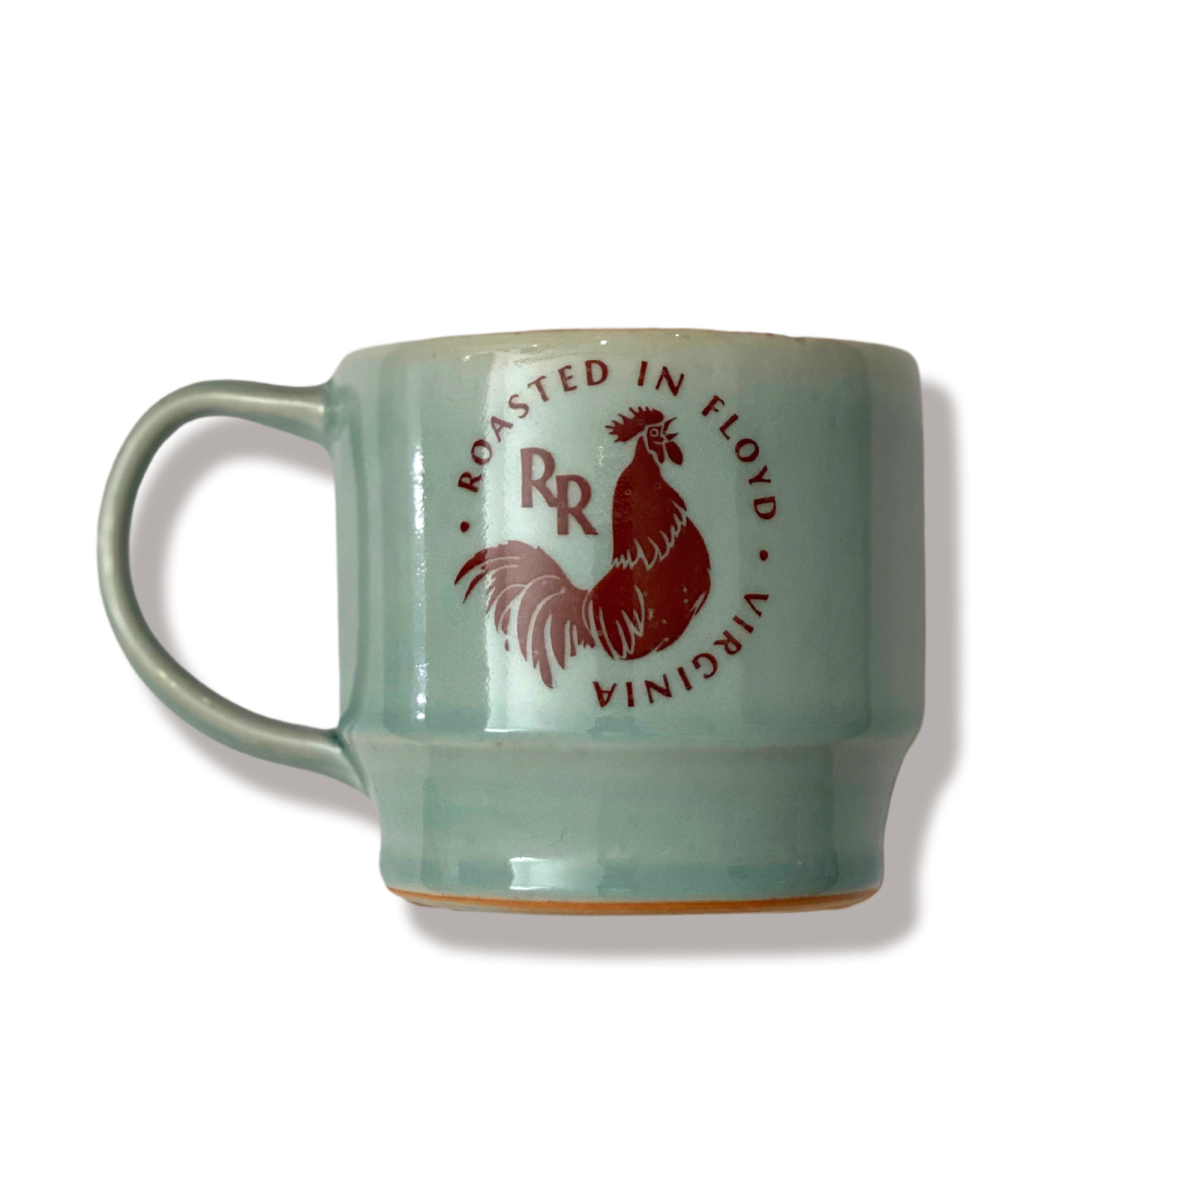 Chemex Double Walled Coffee Mug - Red Rooster Coffee